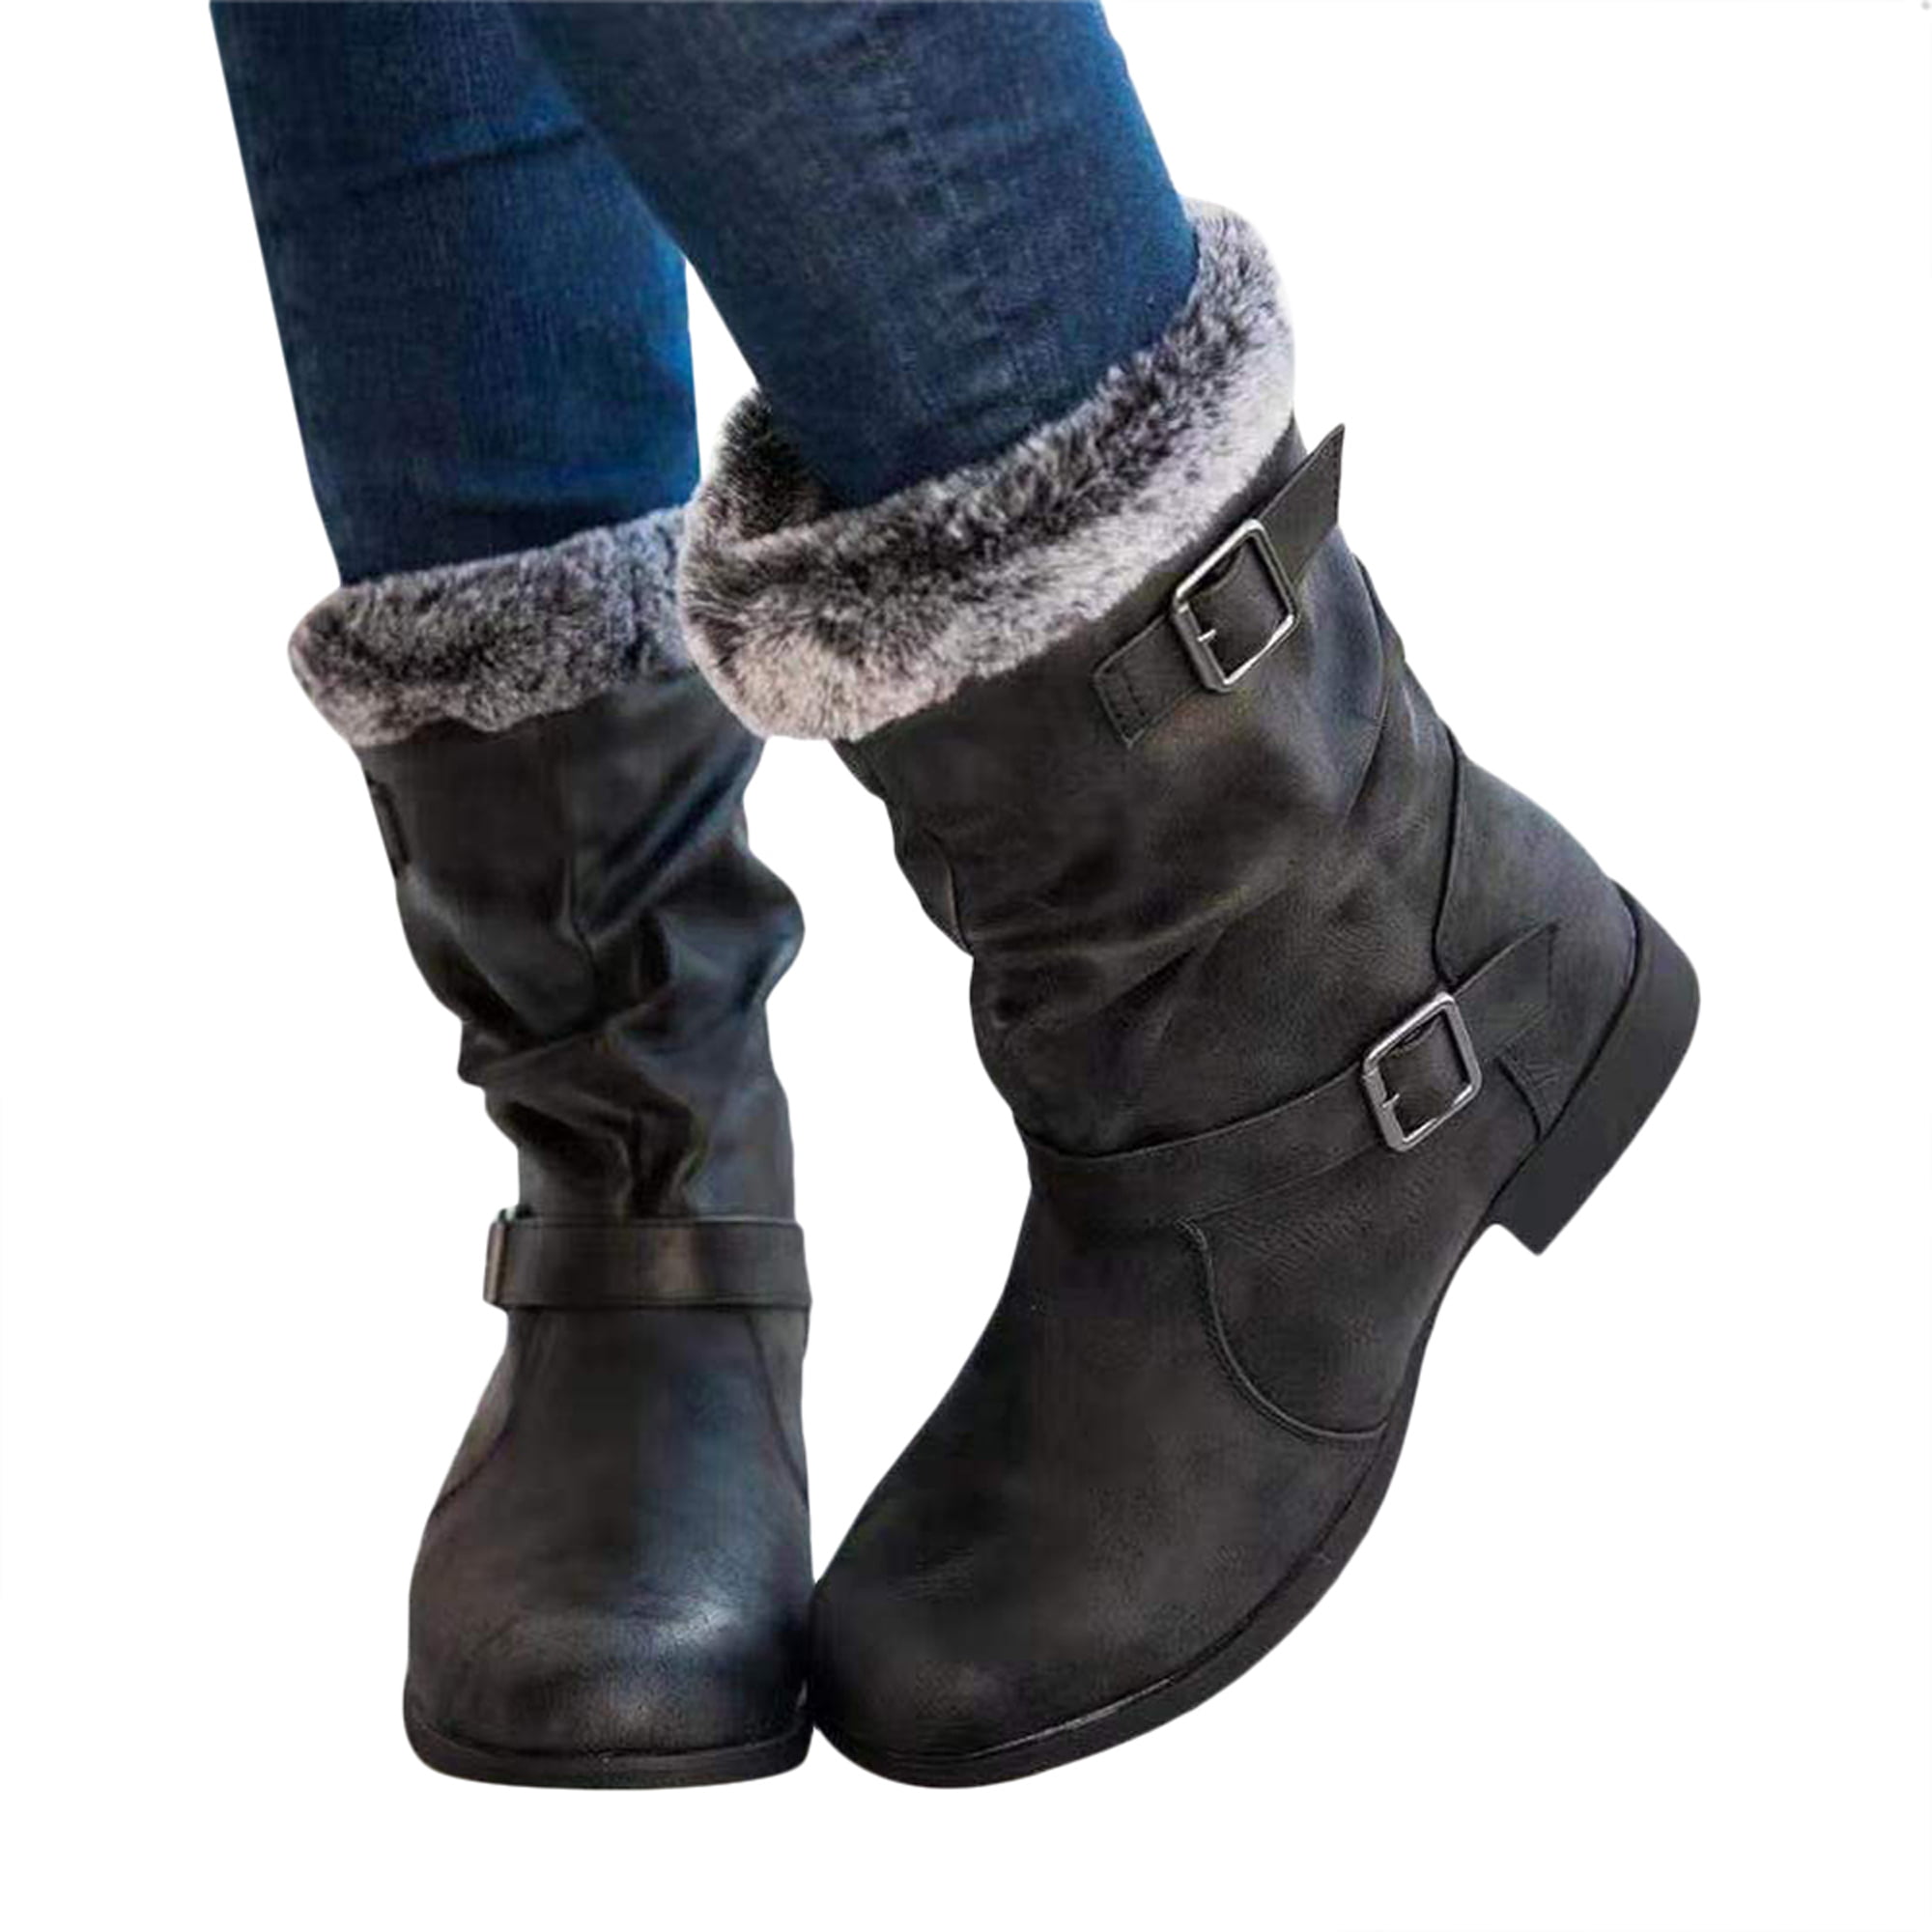 Warm Women Mid Calf Boots Lace Up Faux Fur Mid Heels Winter Casual Party Shoe Sz 